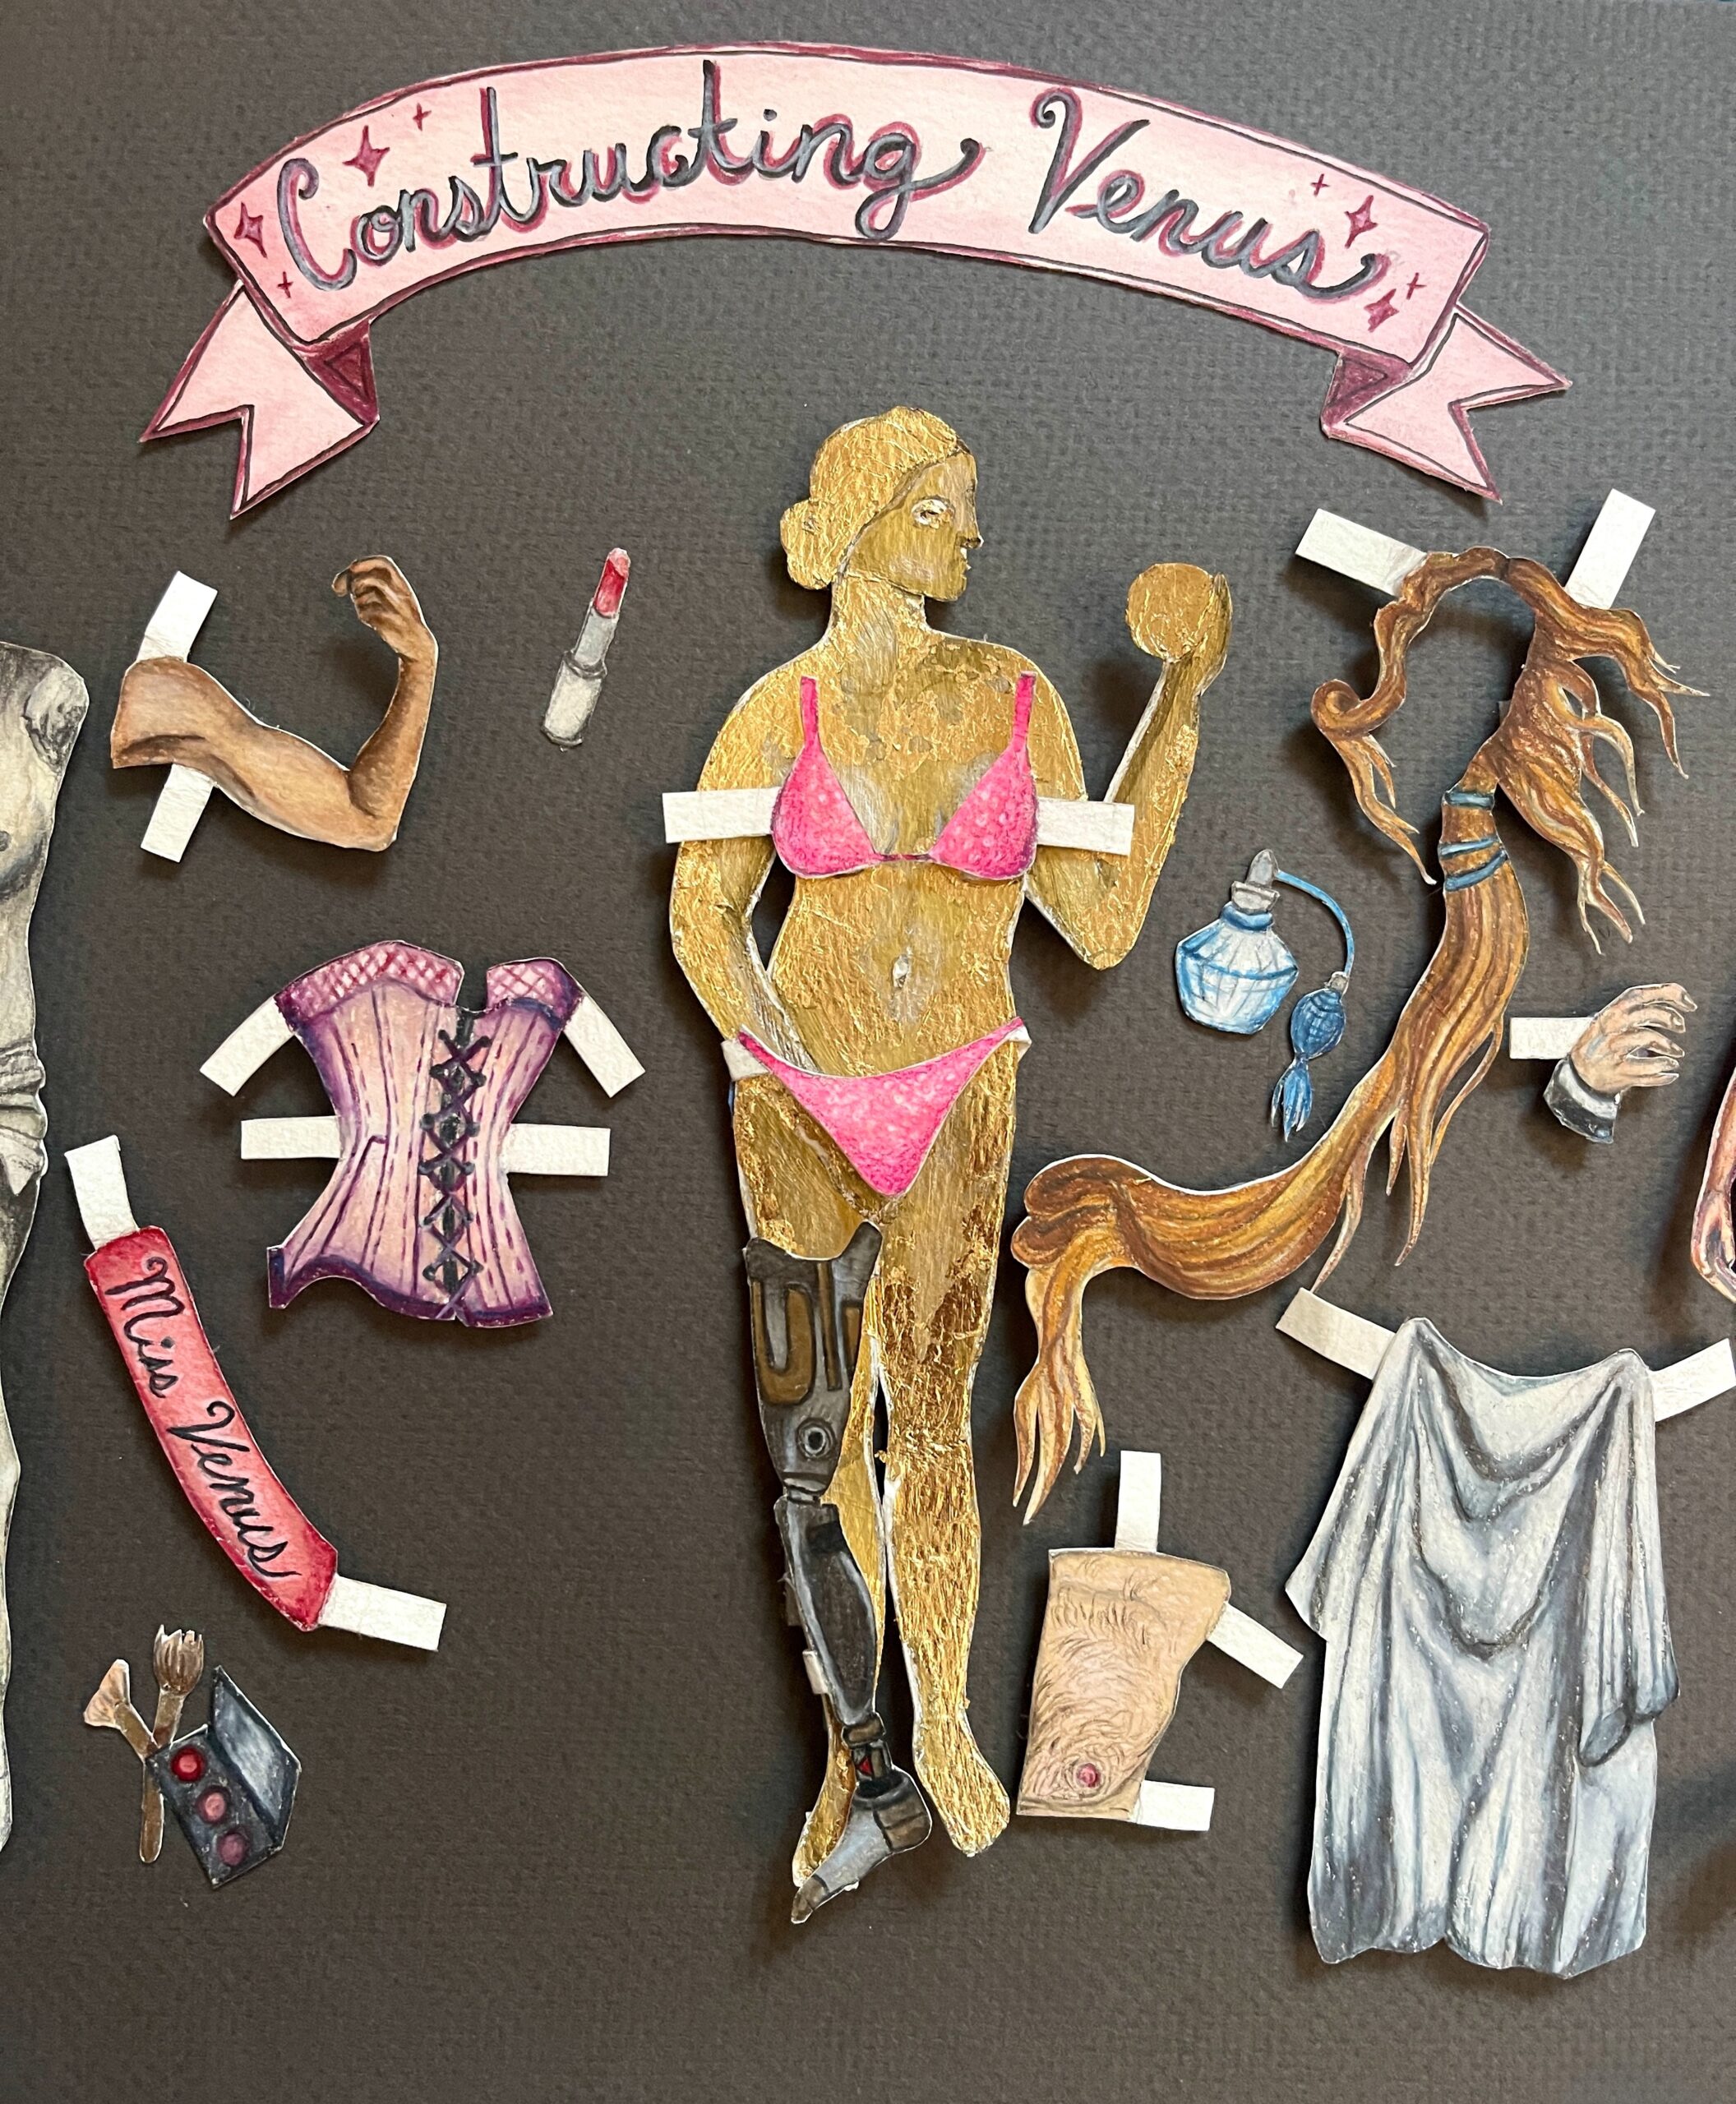 Image shows a detailed shot of the art work in which a pink bikini and crown have been imposed on top of a drawing of the Venus de Milo as if the statue were a paper doll.